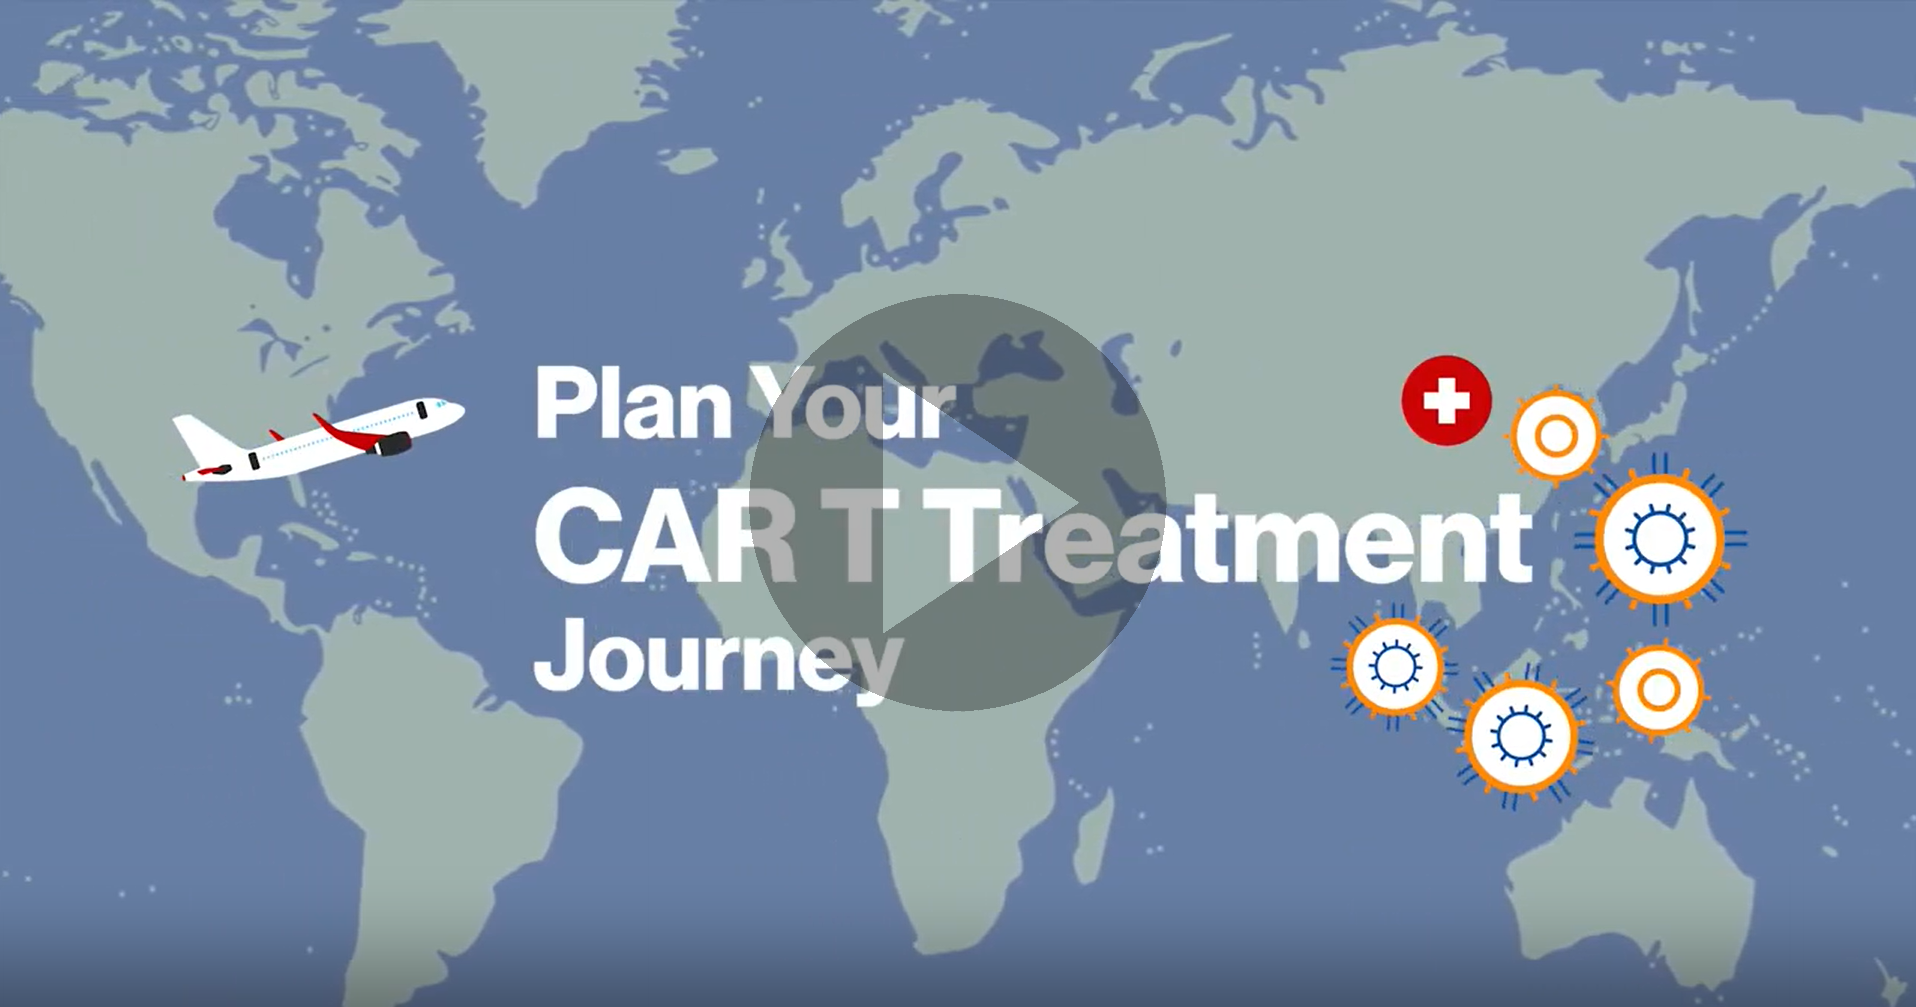 HOW TO PLAN YOUR CAR-T TREATMENT JOURNEY